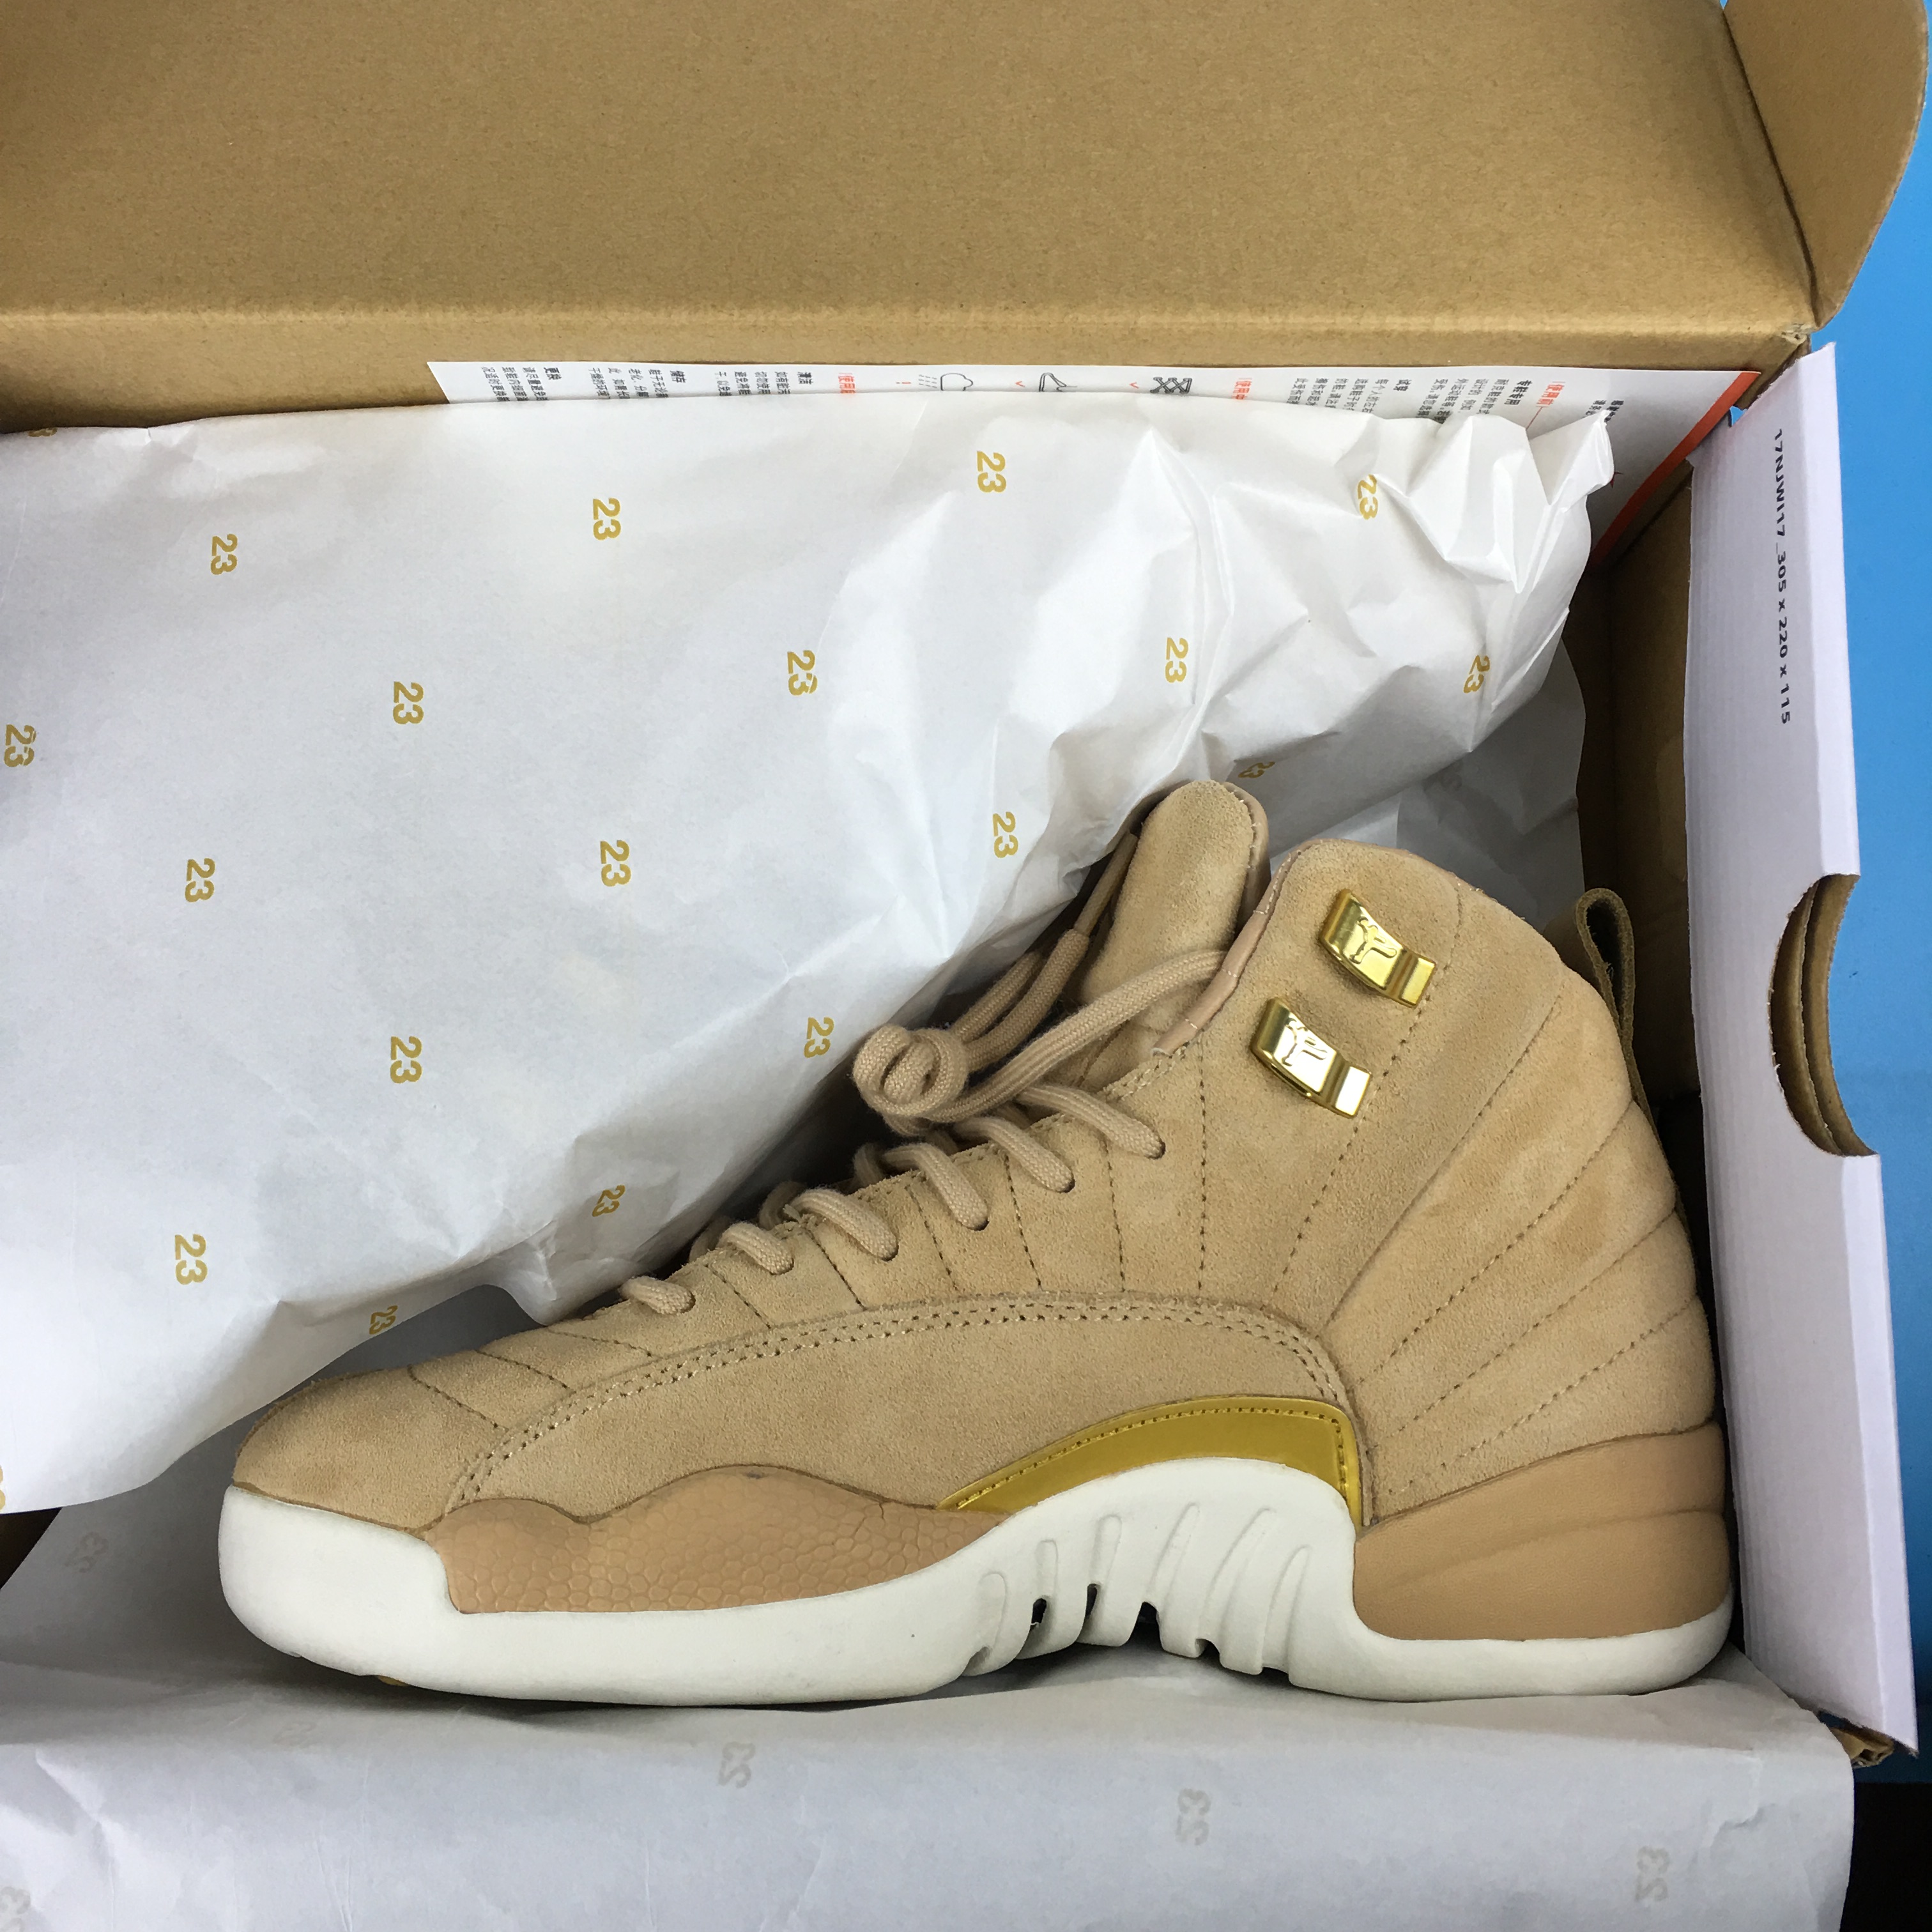 Air Jordan 12 Suede Brown Shoes For Women - Click Image to Close